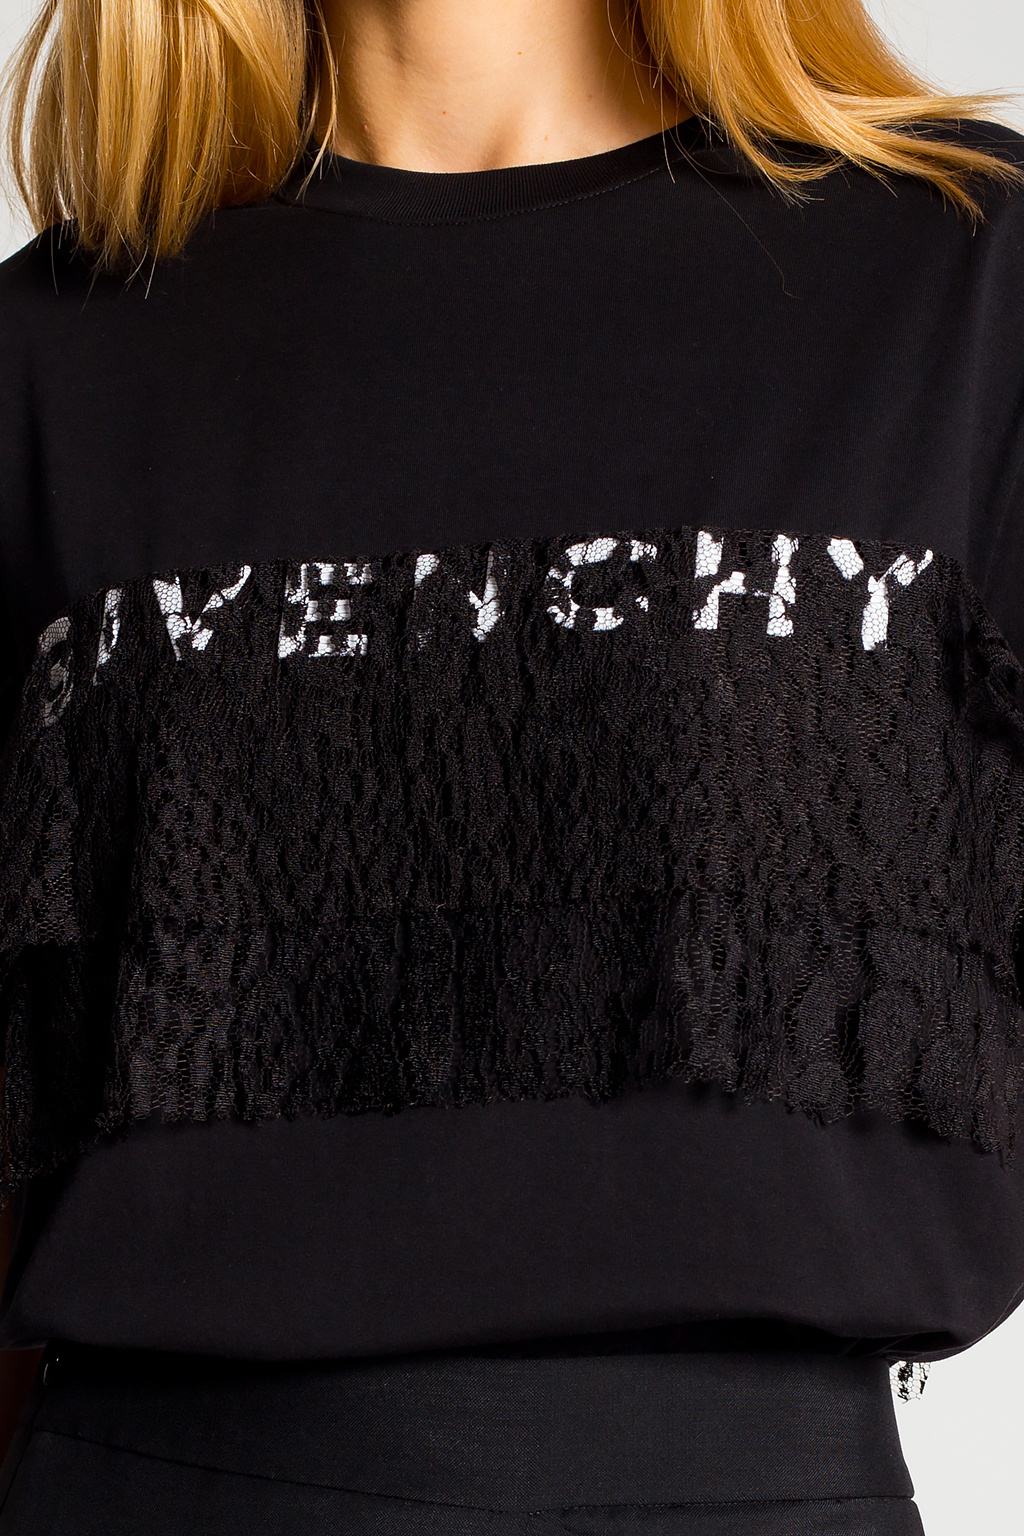 Givenchy detailed T-shirt